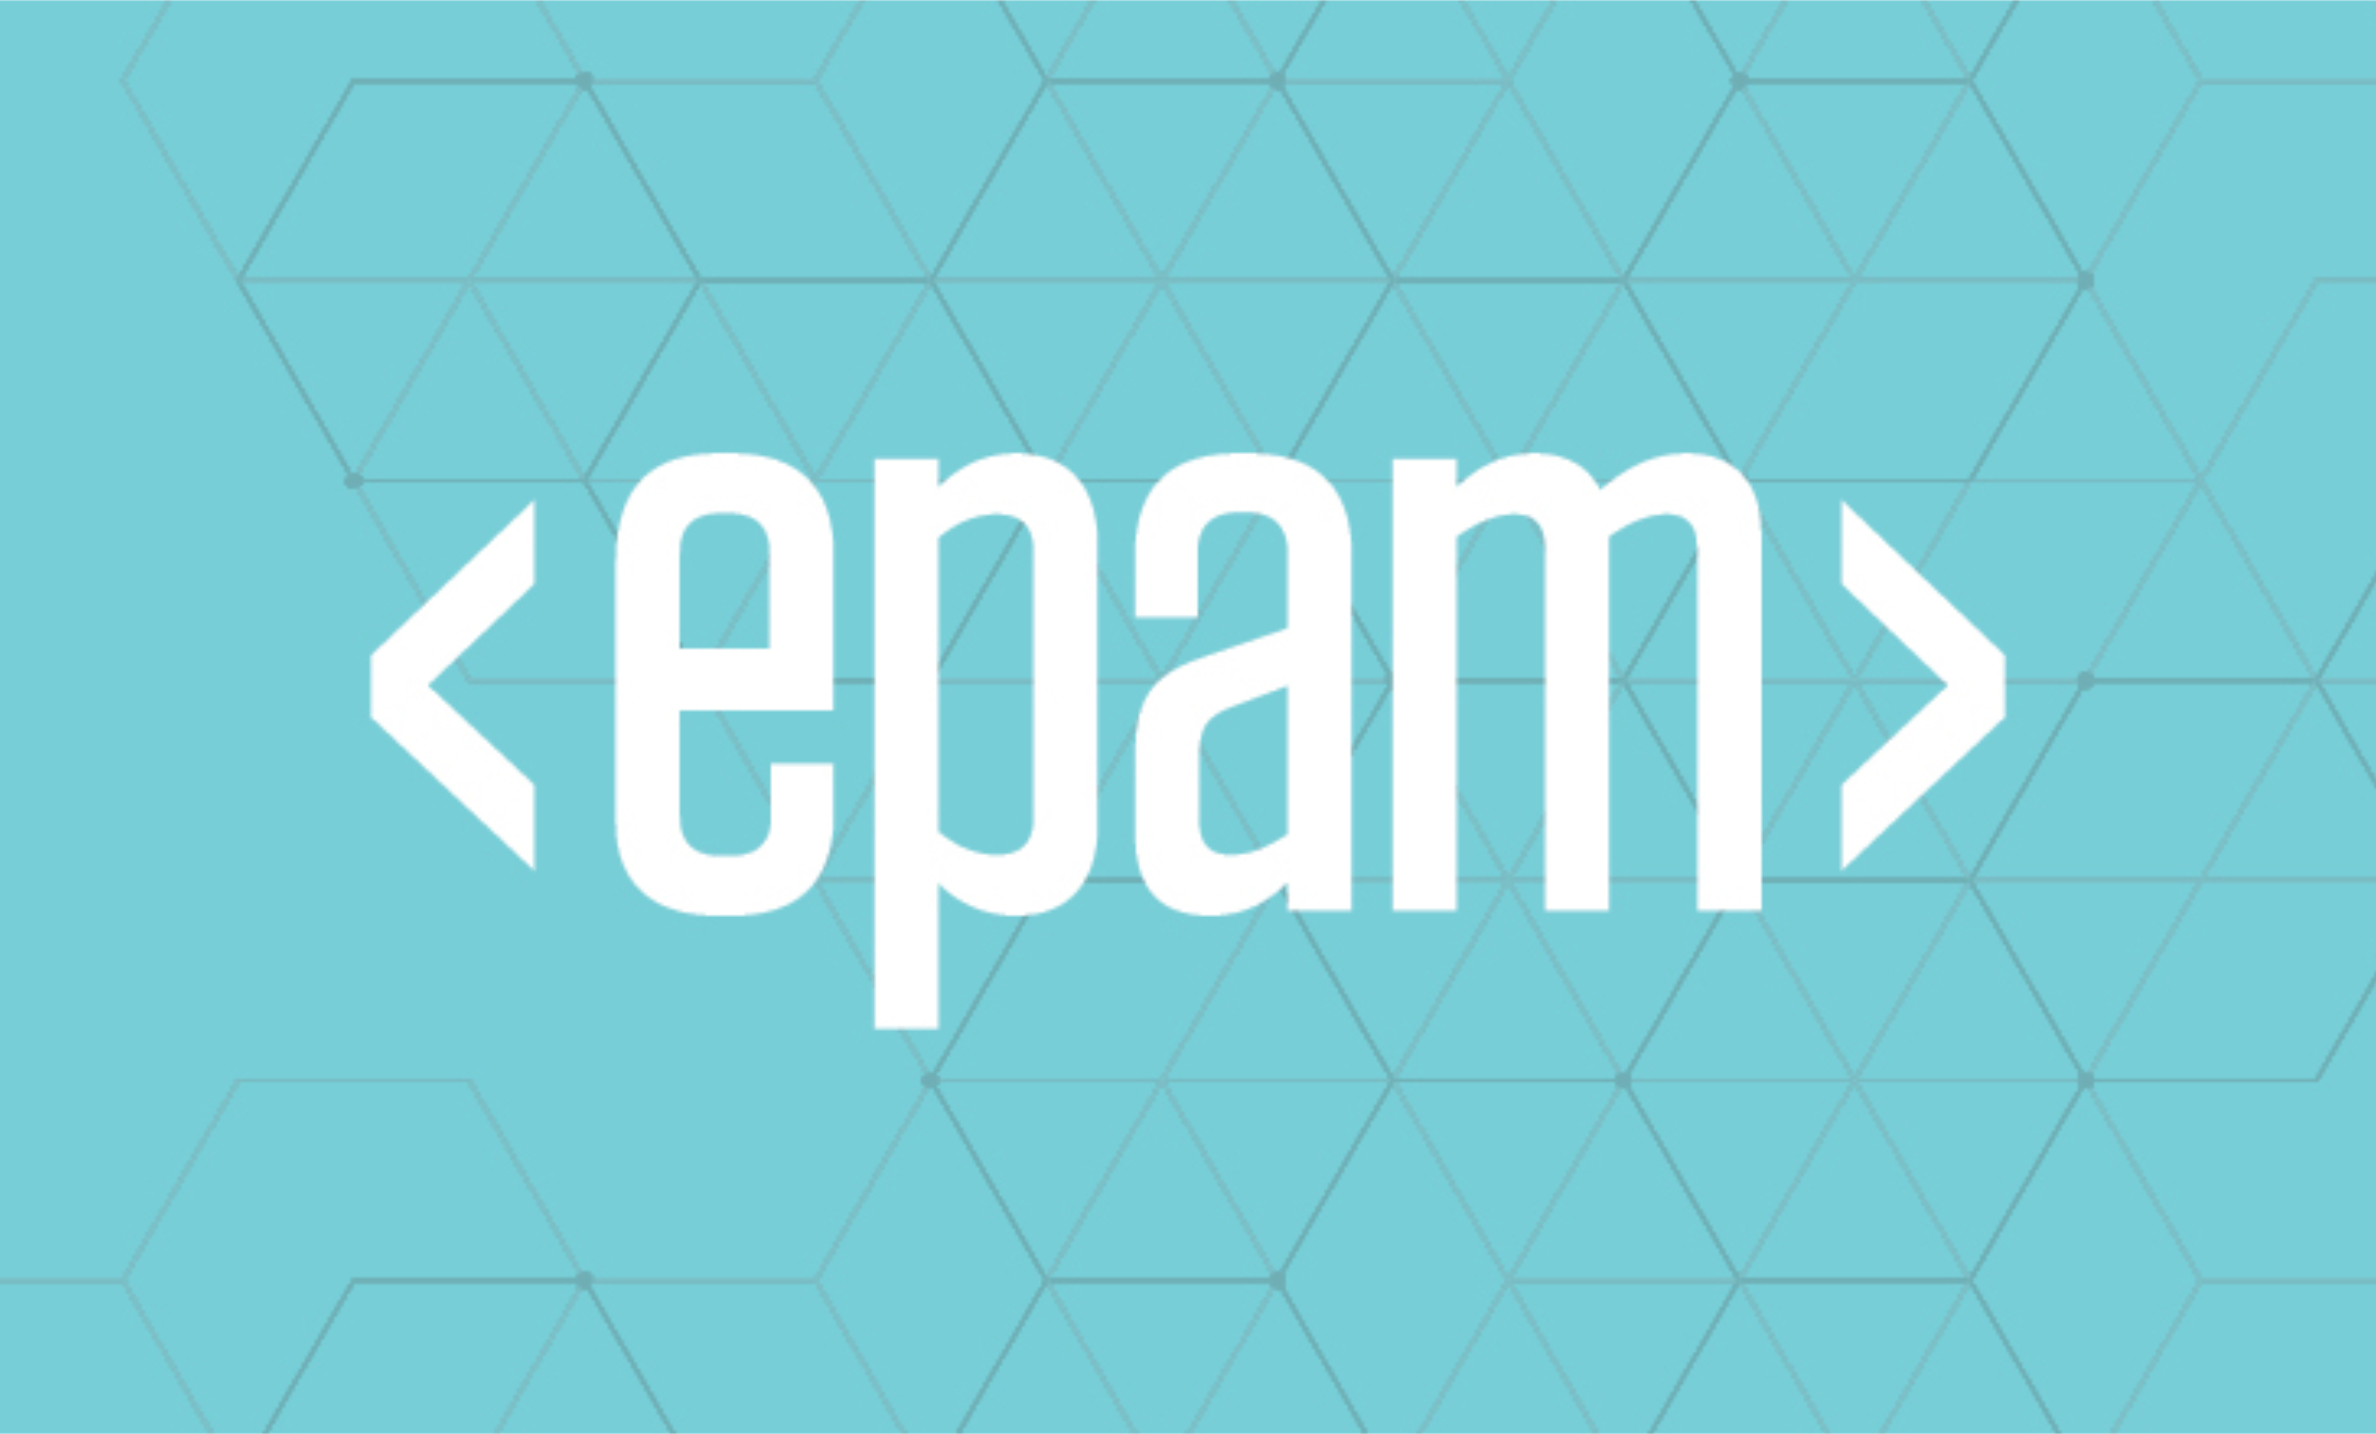 commercetools announces global partnership with EPAM